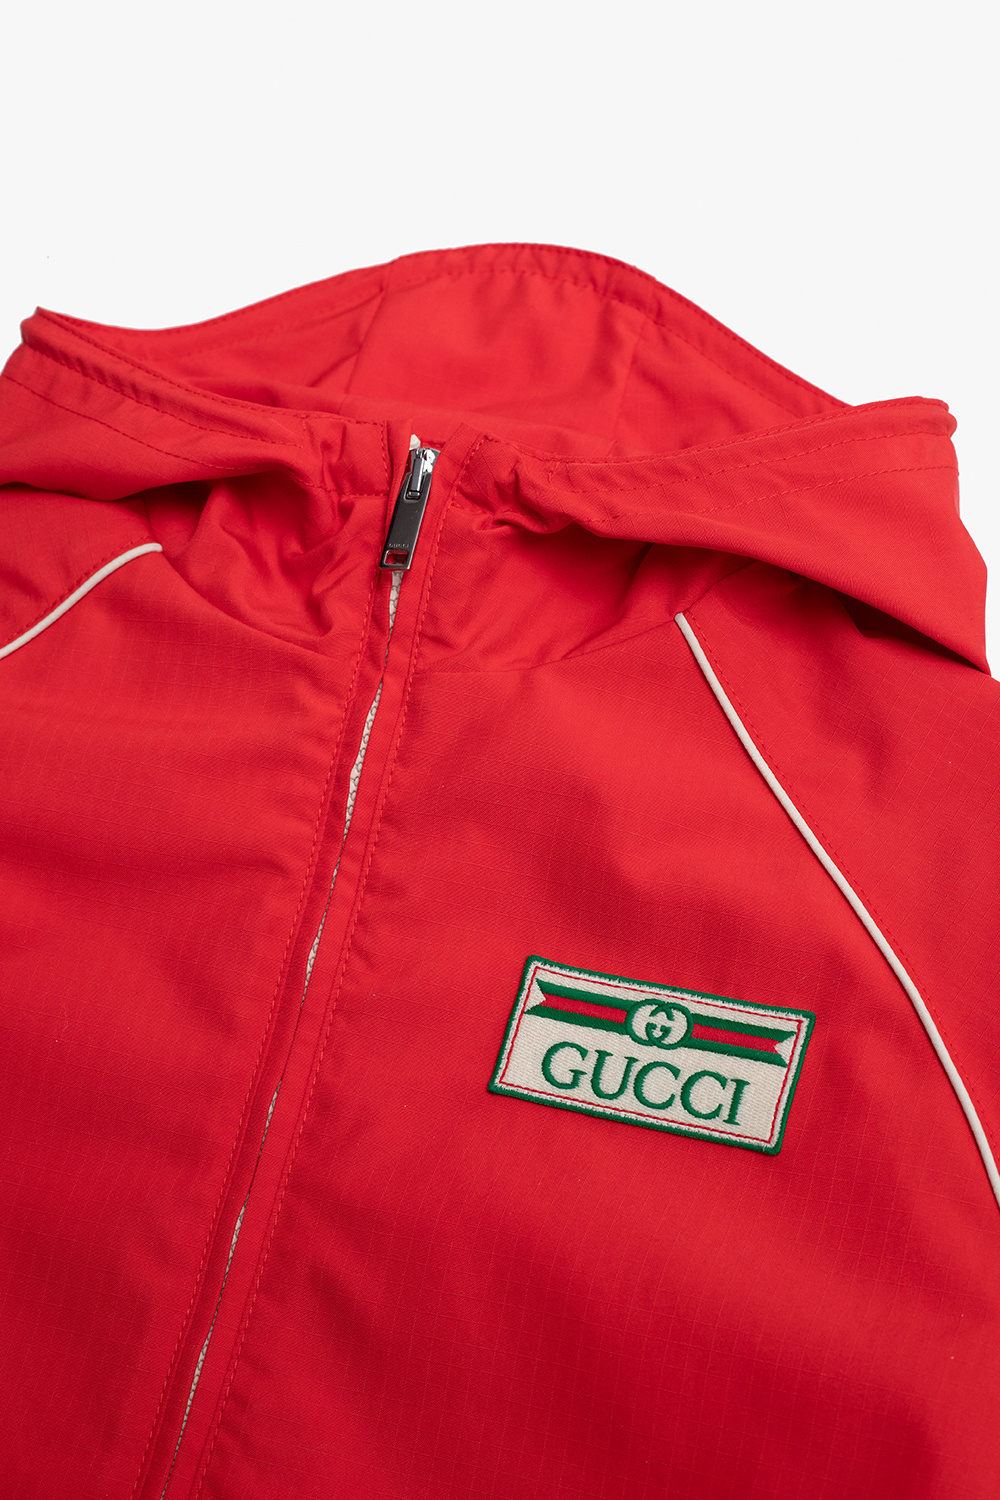 gucci Top Kids Jacket with logo